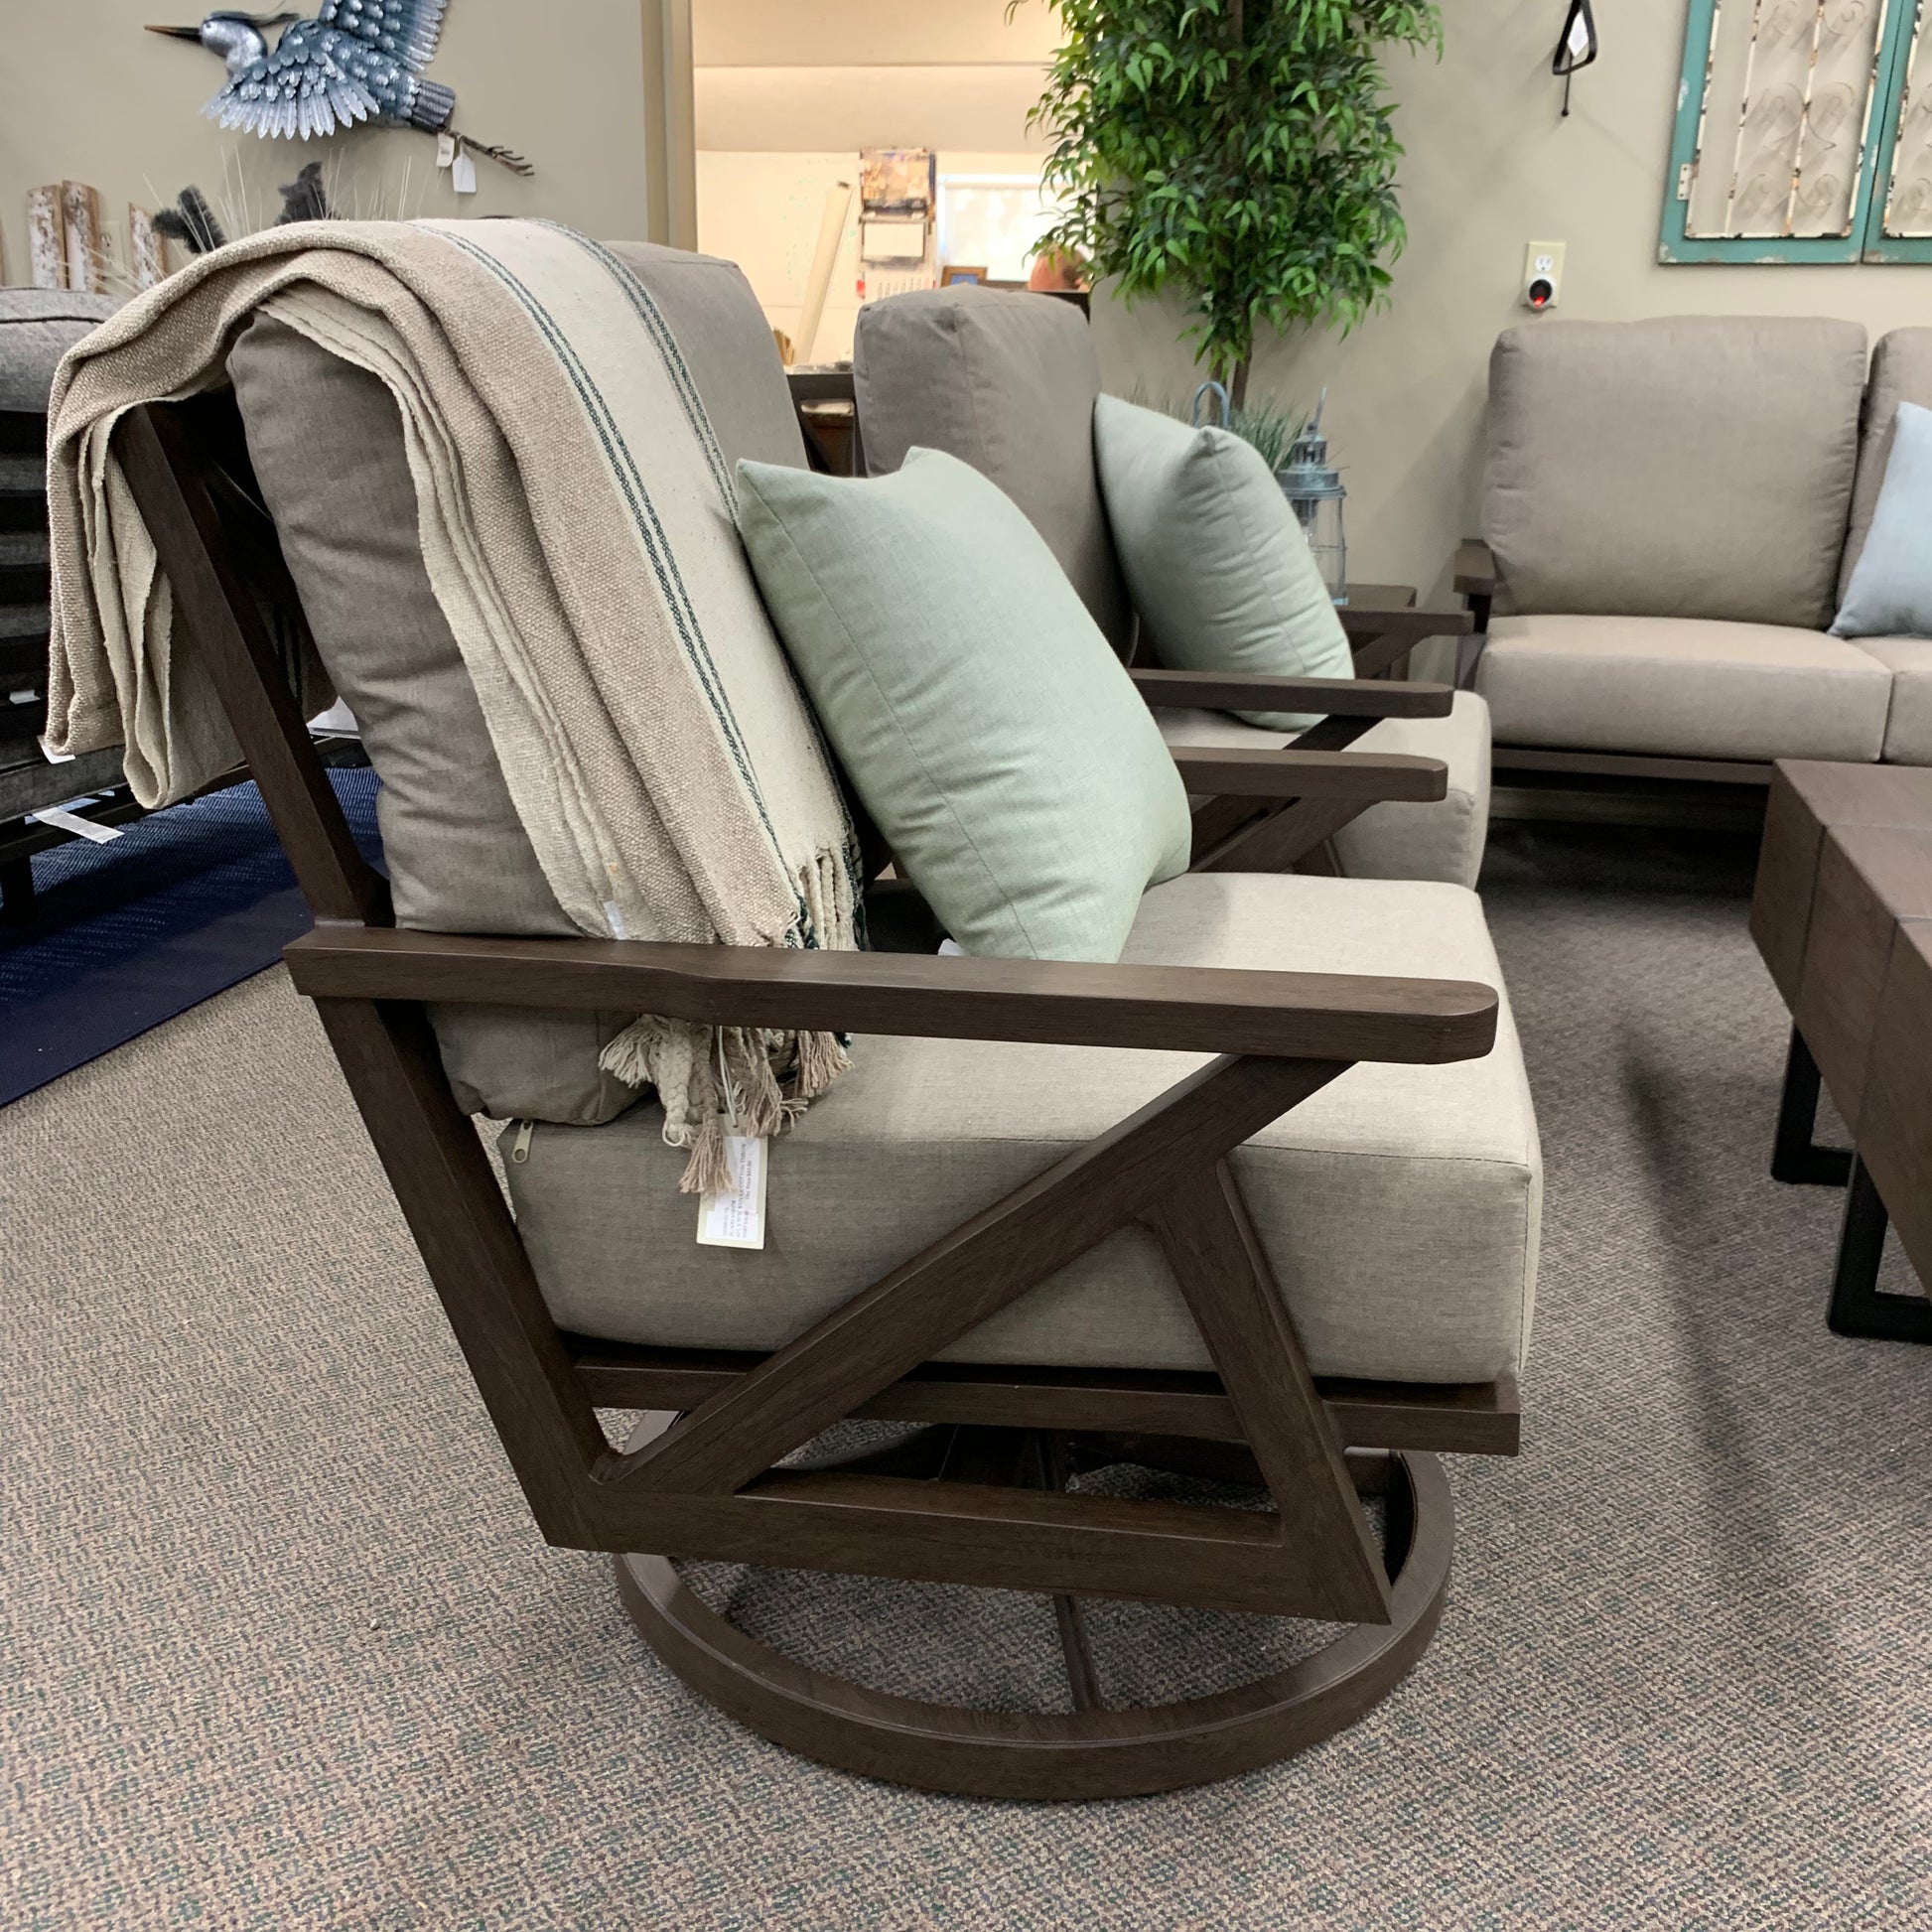 Shop Local Spokane Valley, WA for the best outdoor patio swivel rockers from Patio Renaissance available at Jacobs Custom Living in Spokane Valley, WA 